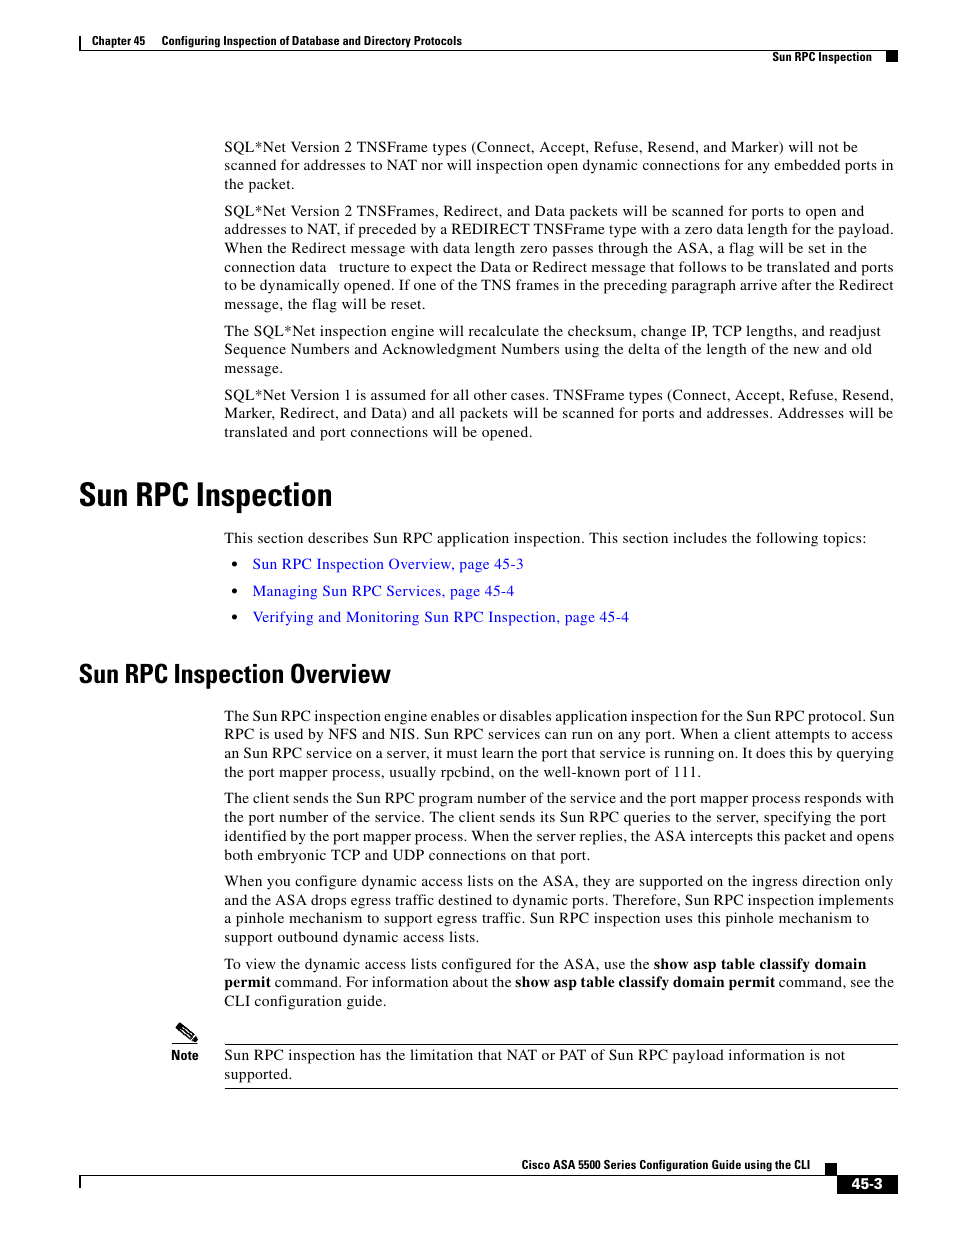 Sun rpc inspection, Sun rpc inspection overview | Cisco ASA 5505 User Manual | Page 943 / 1994